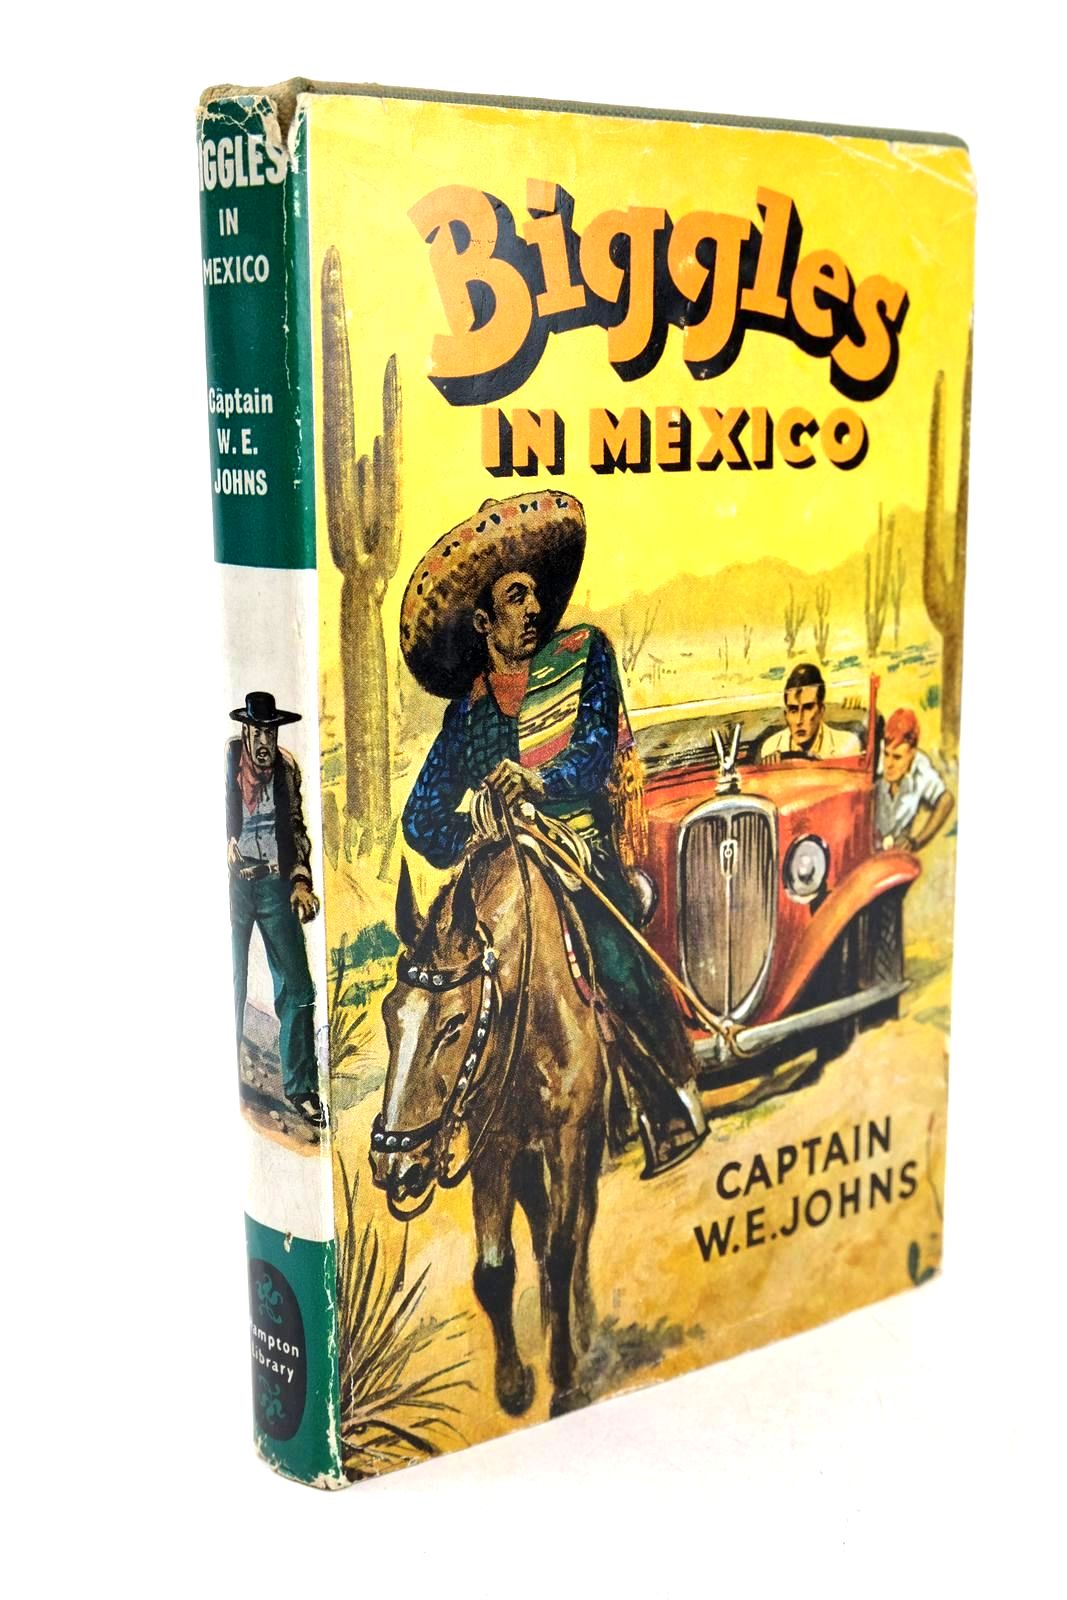 Photo of BIGGLES IN MEXICO written by Johns, W.E. published by Brockhampton Press (STOCK CODE: 1326592)  for sale by Stella & Rose's Books